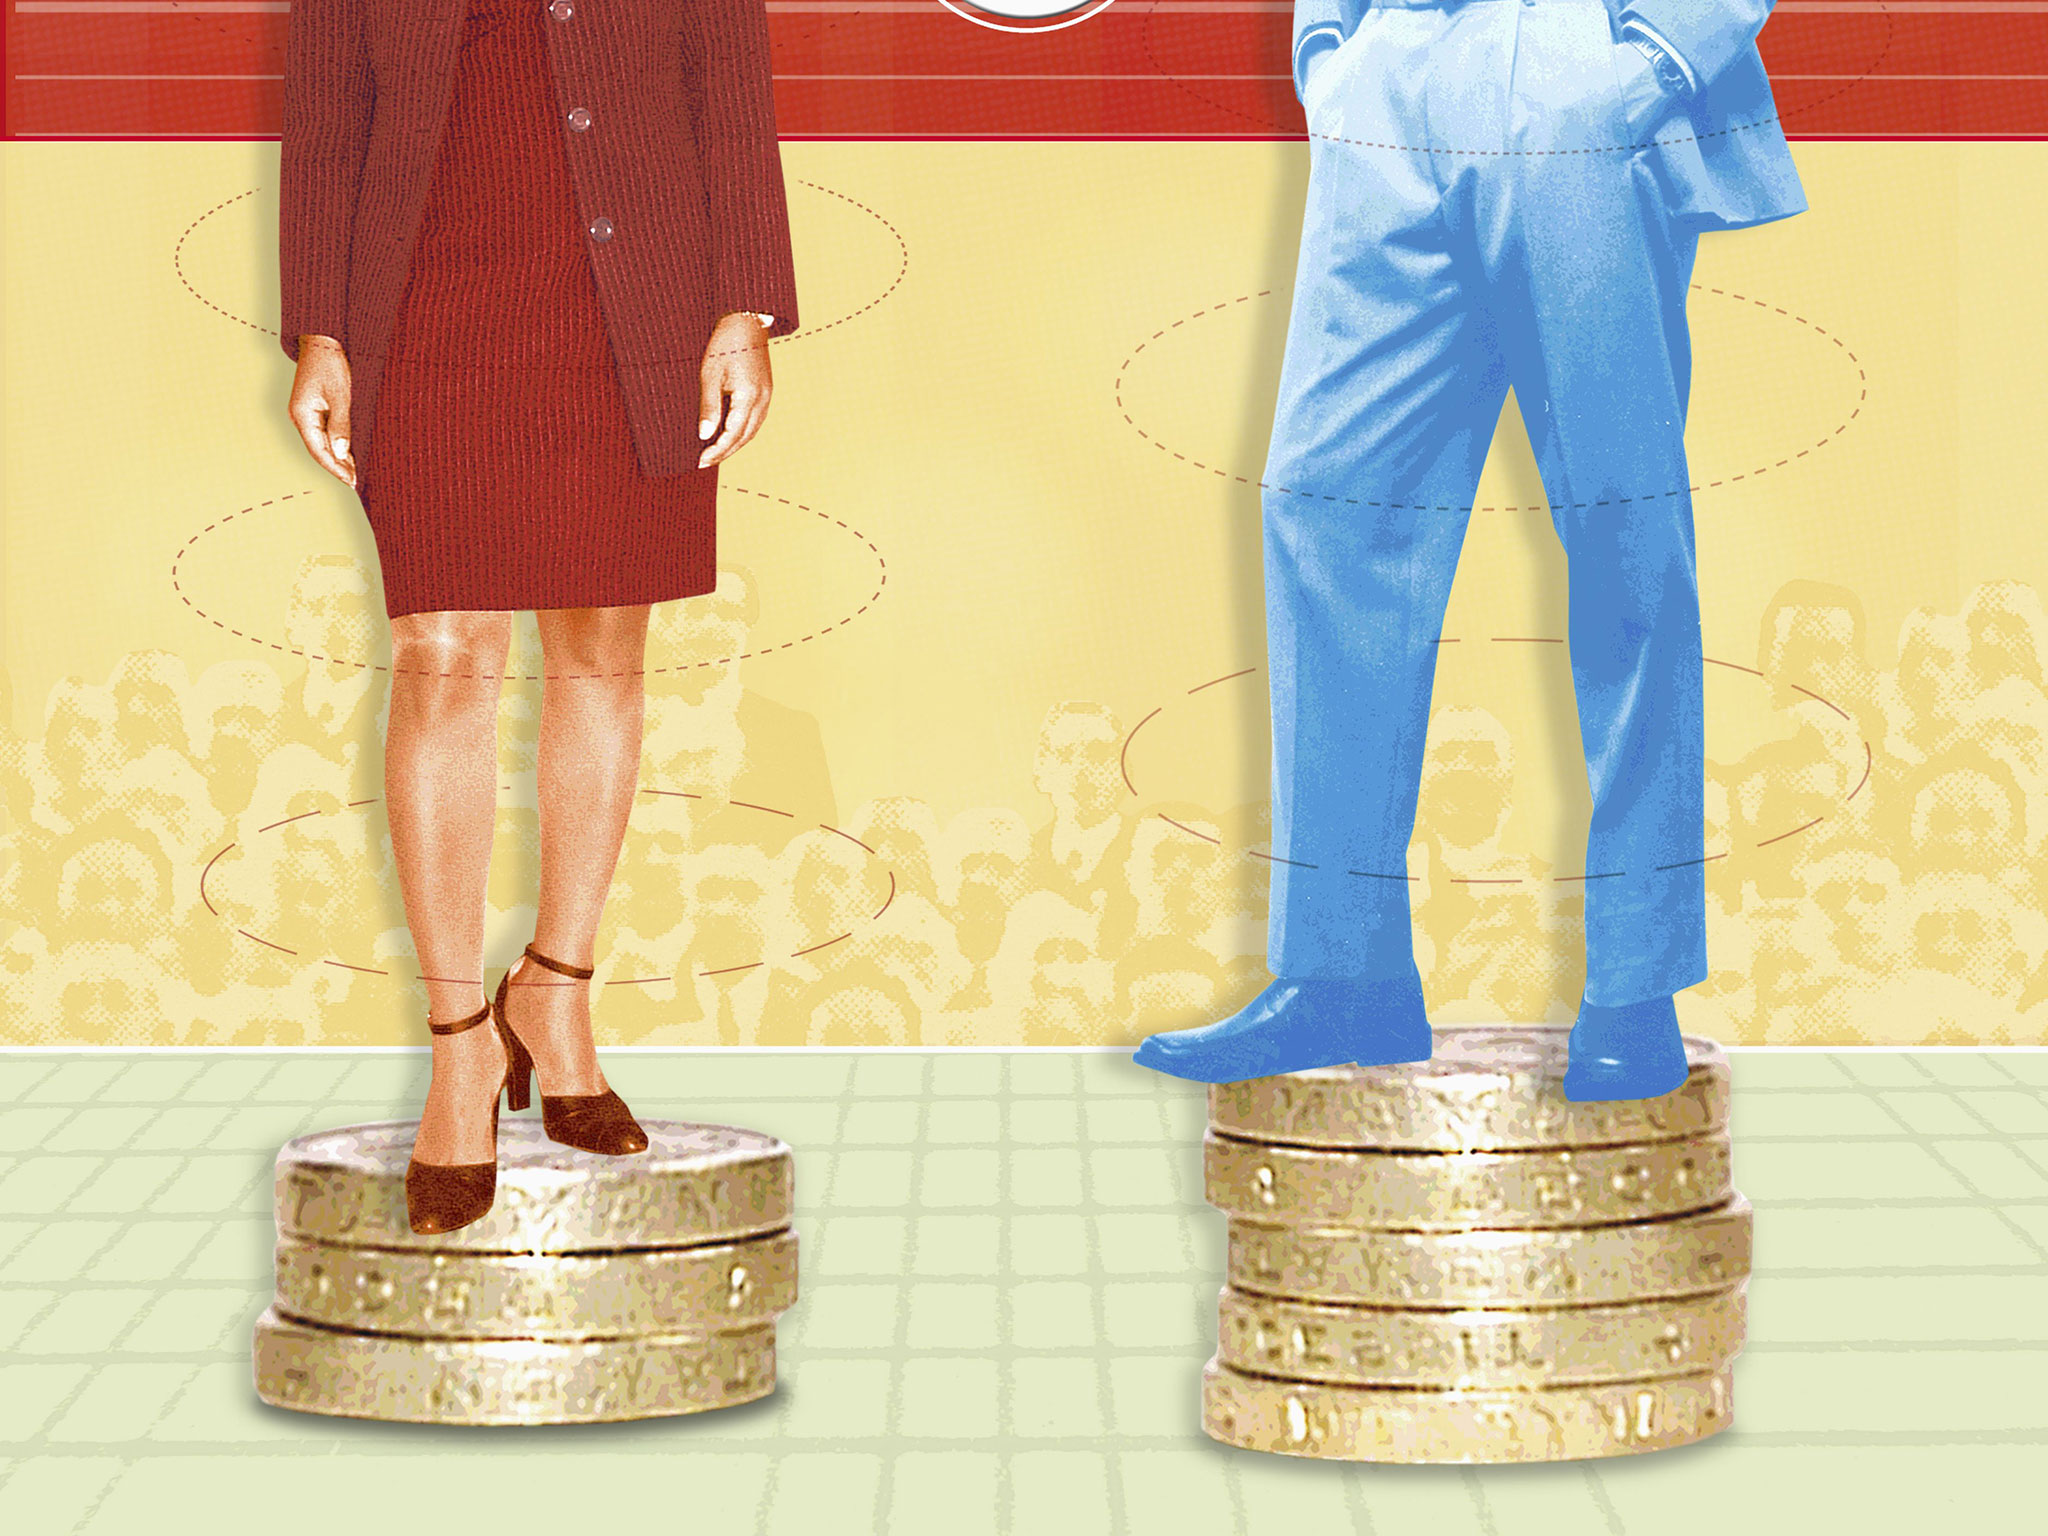 ETUC Published Its Own Proposal For A Directive On Equal Pay For Women And Men